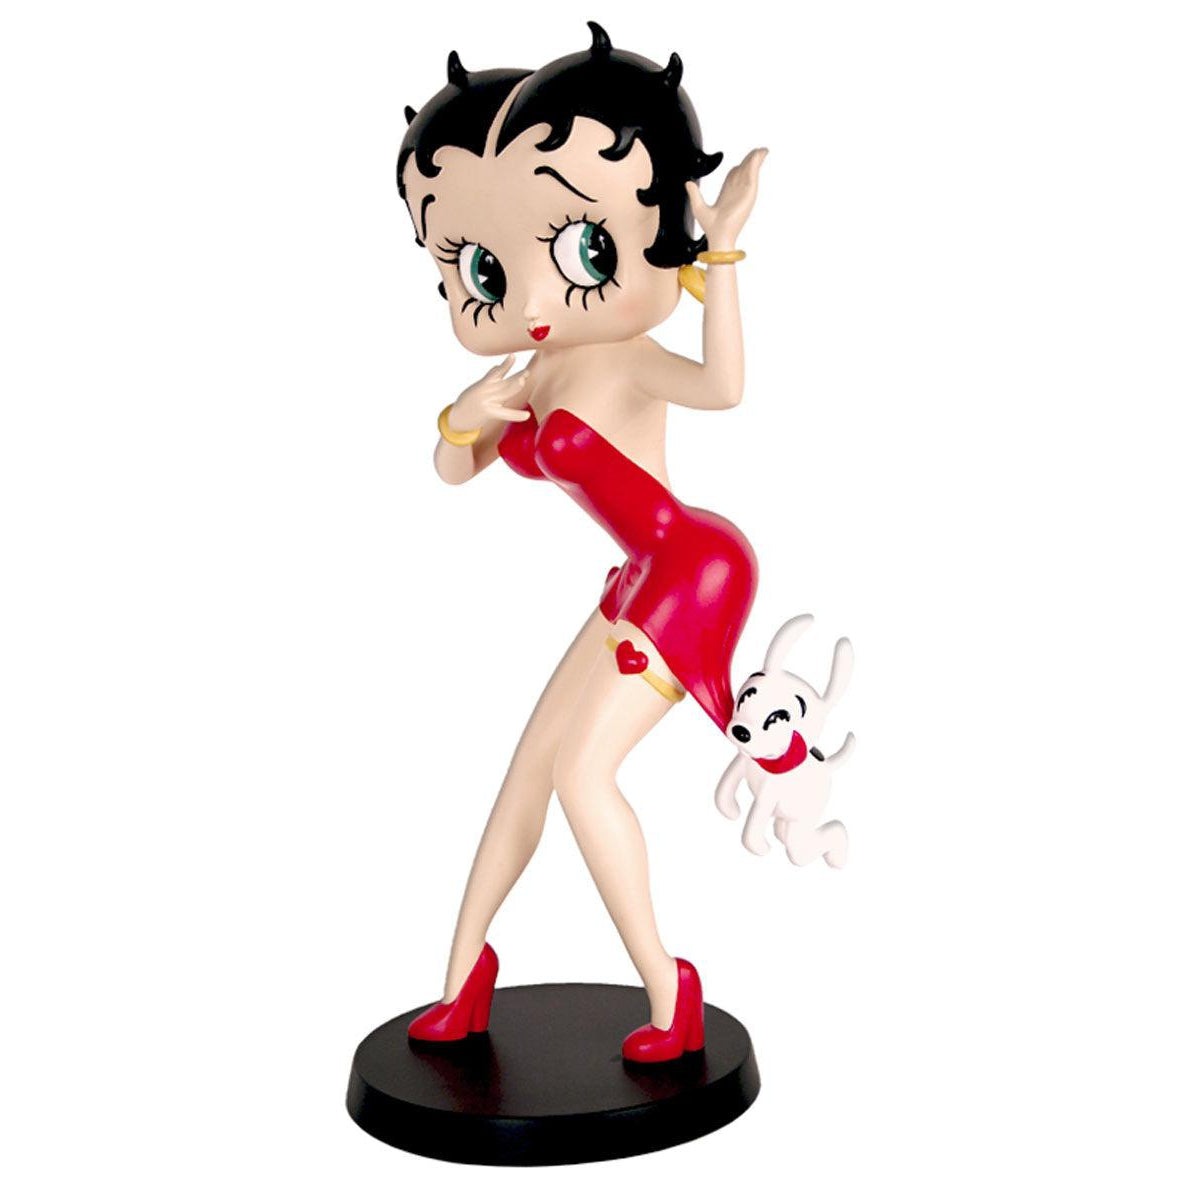 Betty Boop Being Chased (Betty Boop)